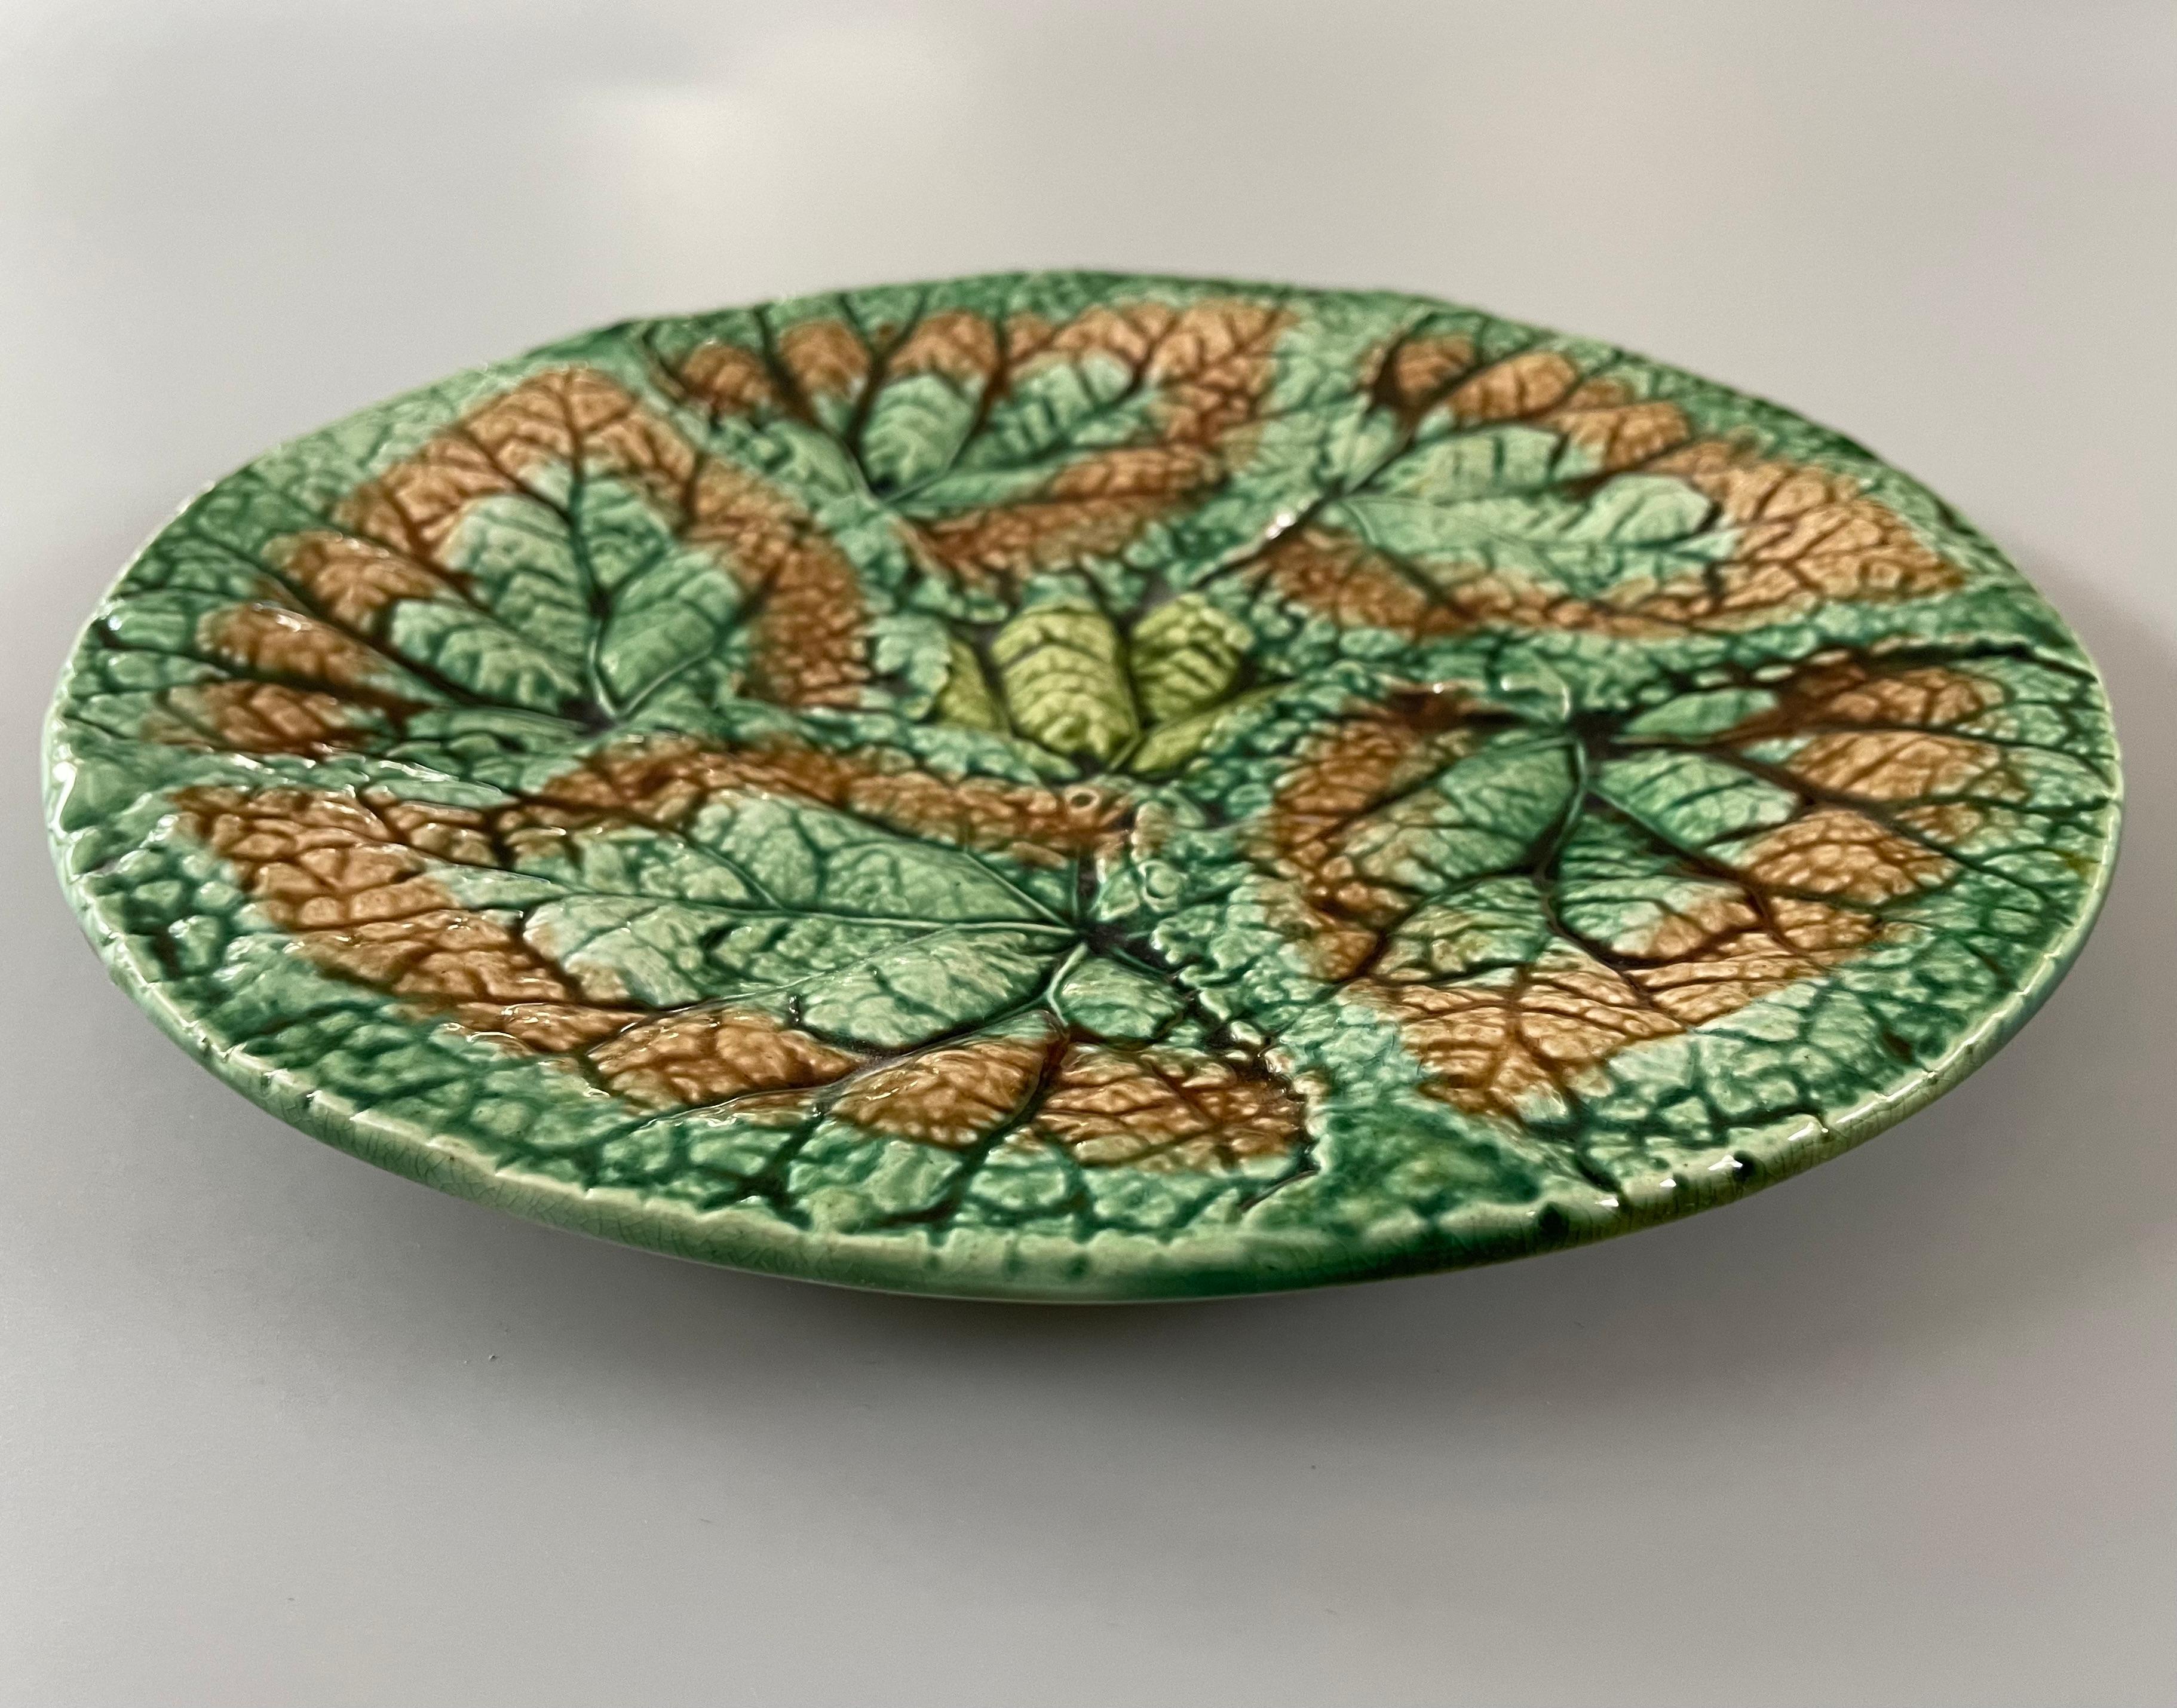 A 19th Century Majolica glazed ceramic begonia leaf plate by Griffen Smith & Hill. A nicely textured Etruscan majolica plate with overlapping green and brown leaves. Green and gold glaze on the reverse side. Makers mark stamped to underside. The